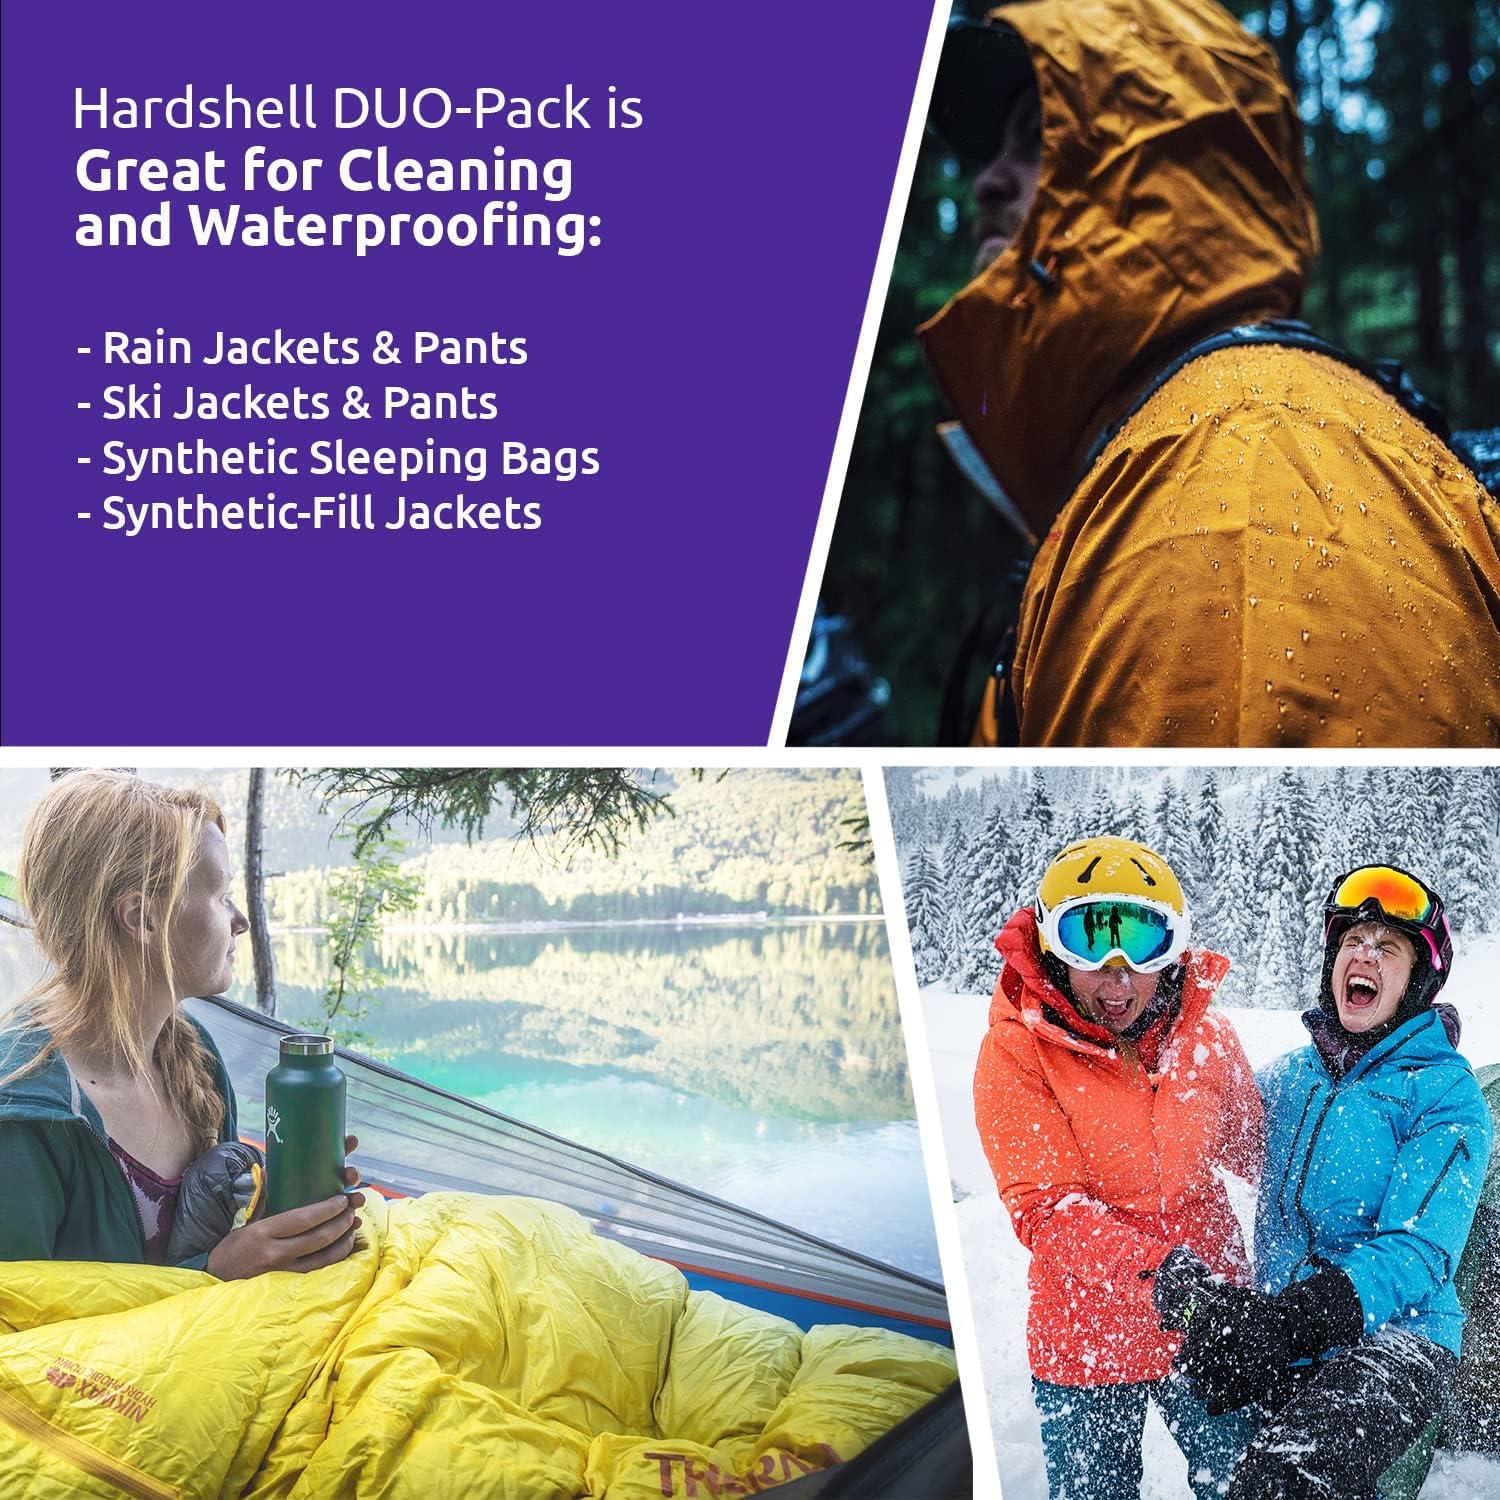 SoftShell DUO-Pack